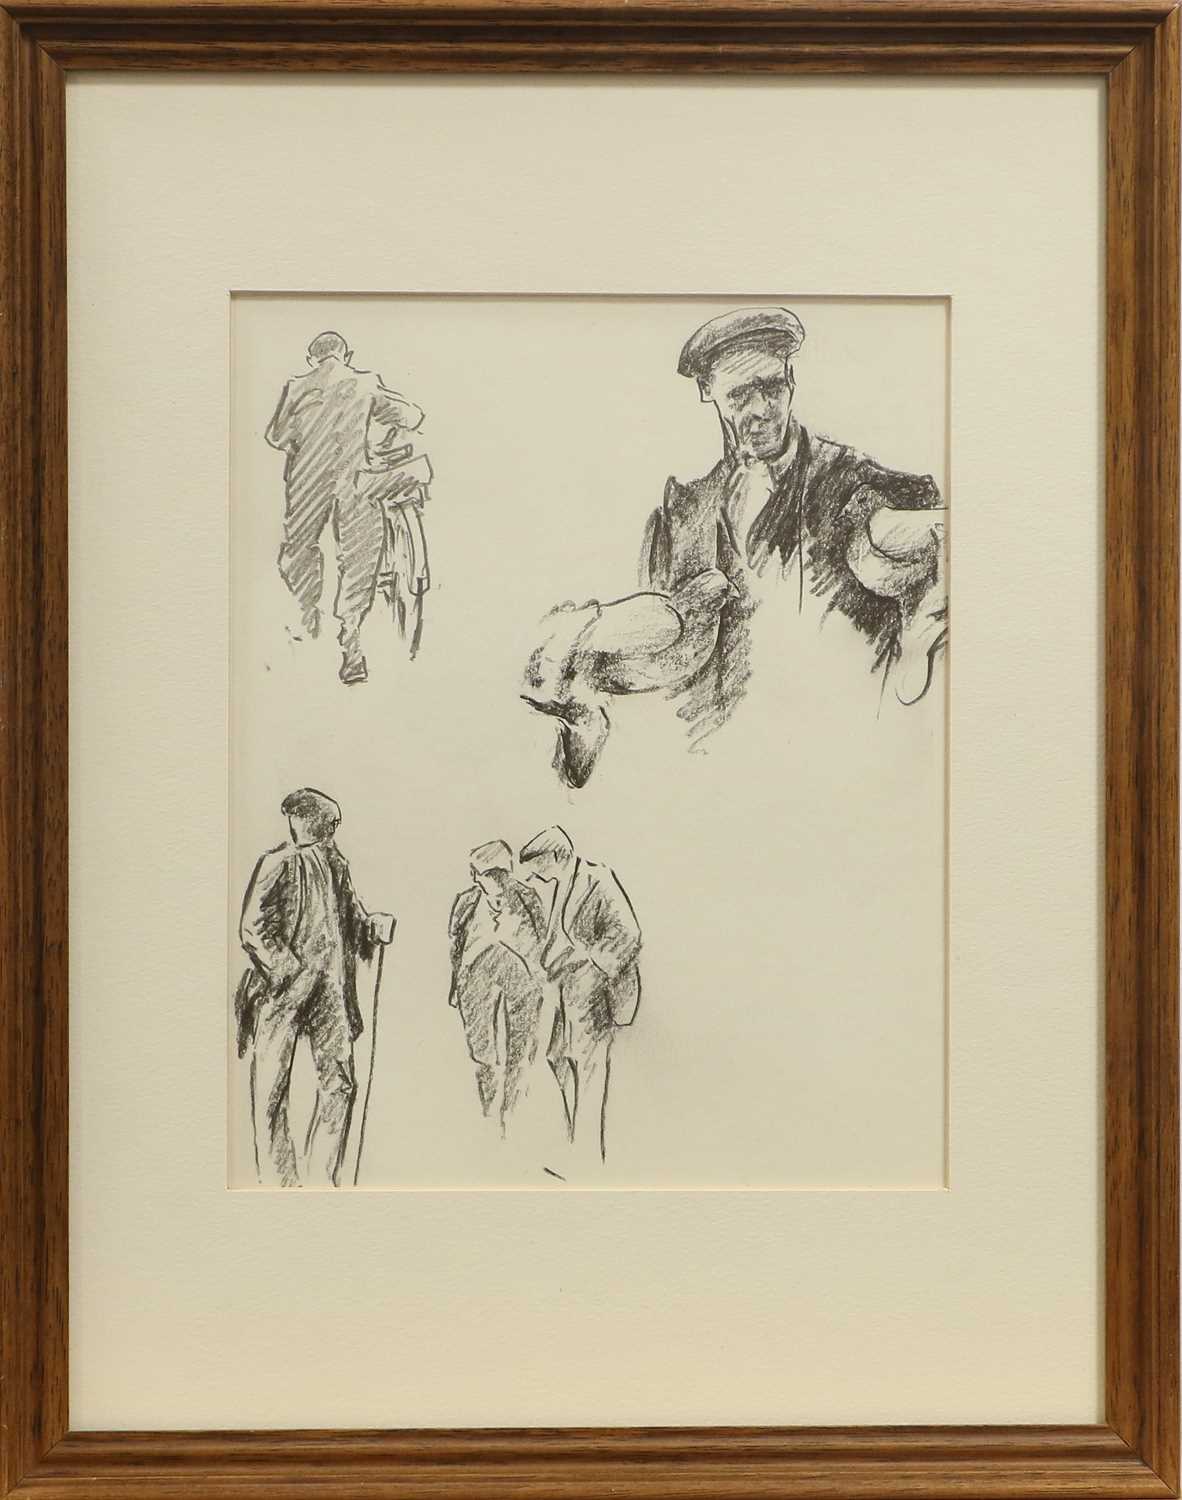 Brian Irving (1931-2013) "Dalesman kalling" Charcoal, together with a further charcoal sketch by the - Image 5 of 6